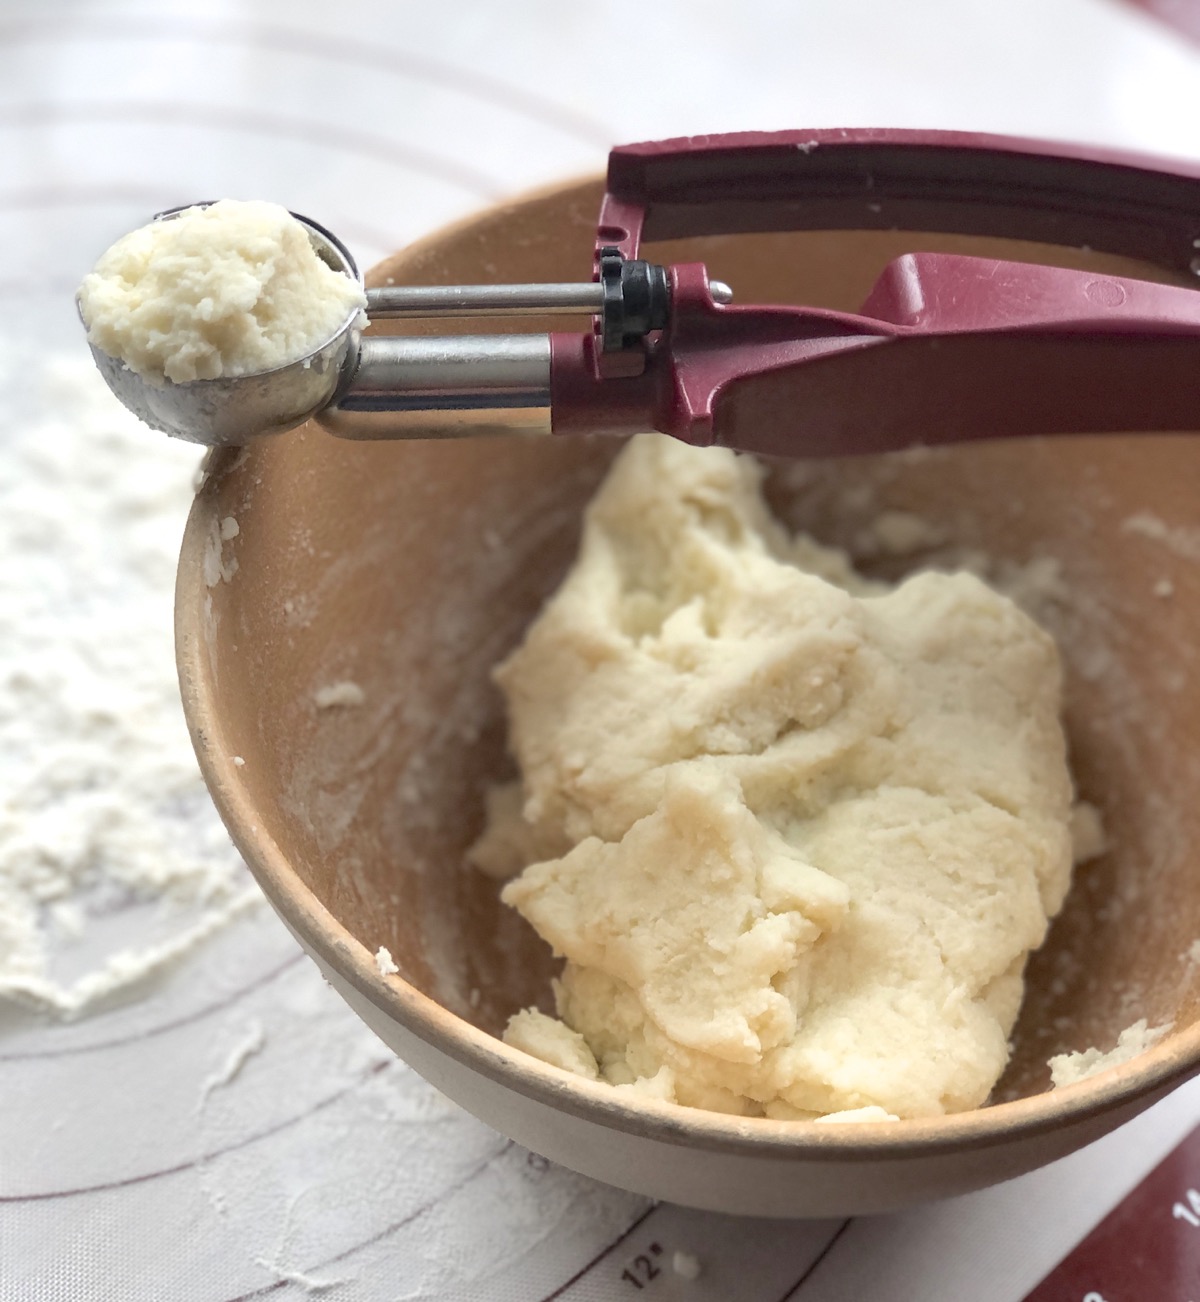 Lefse dough in a bowl, tablespoon cookie scoop holding a generous scoop alongside.